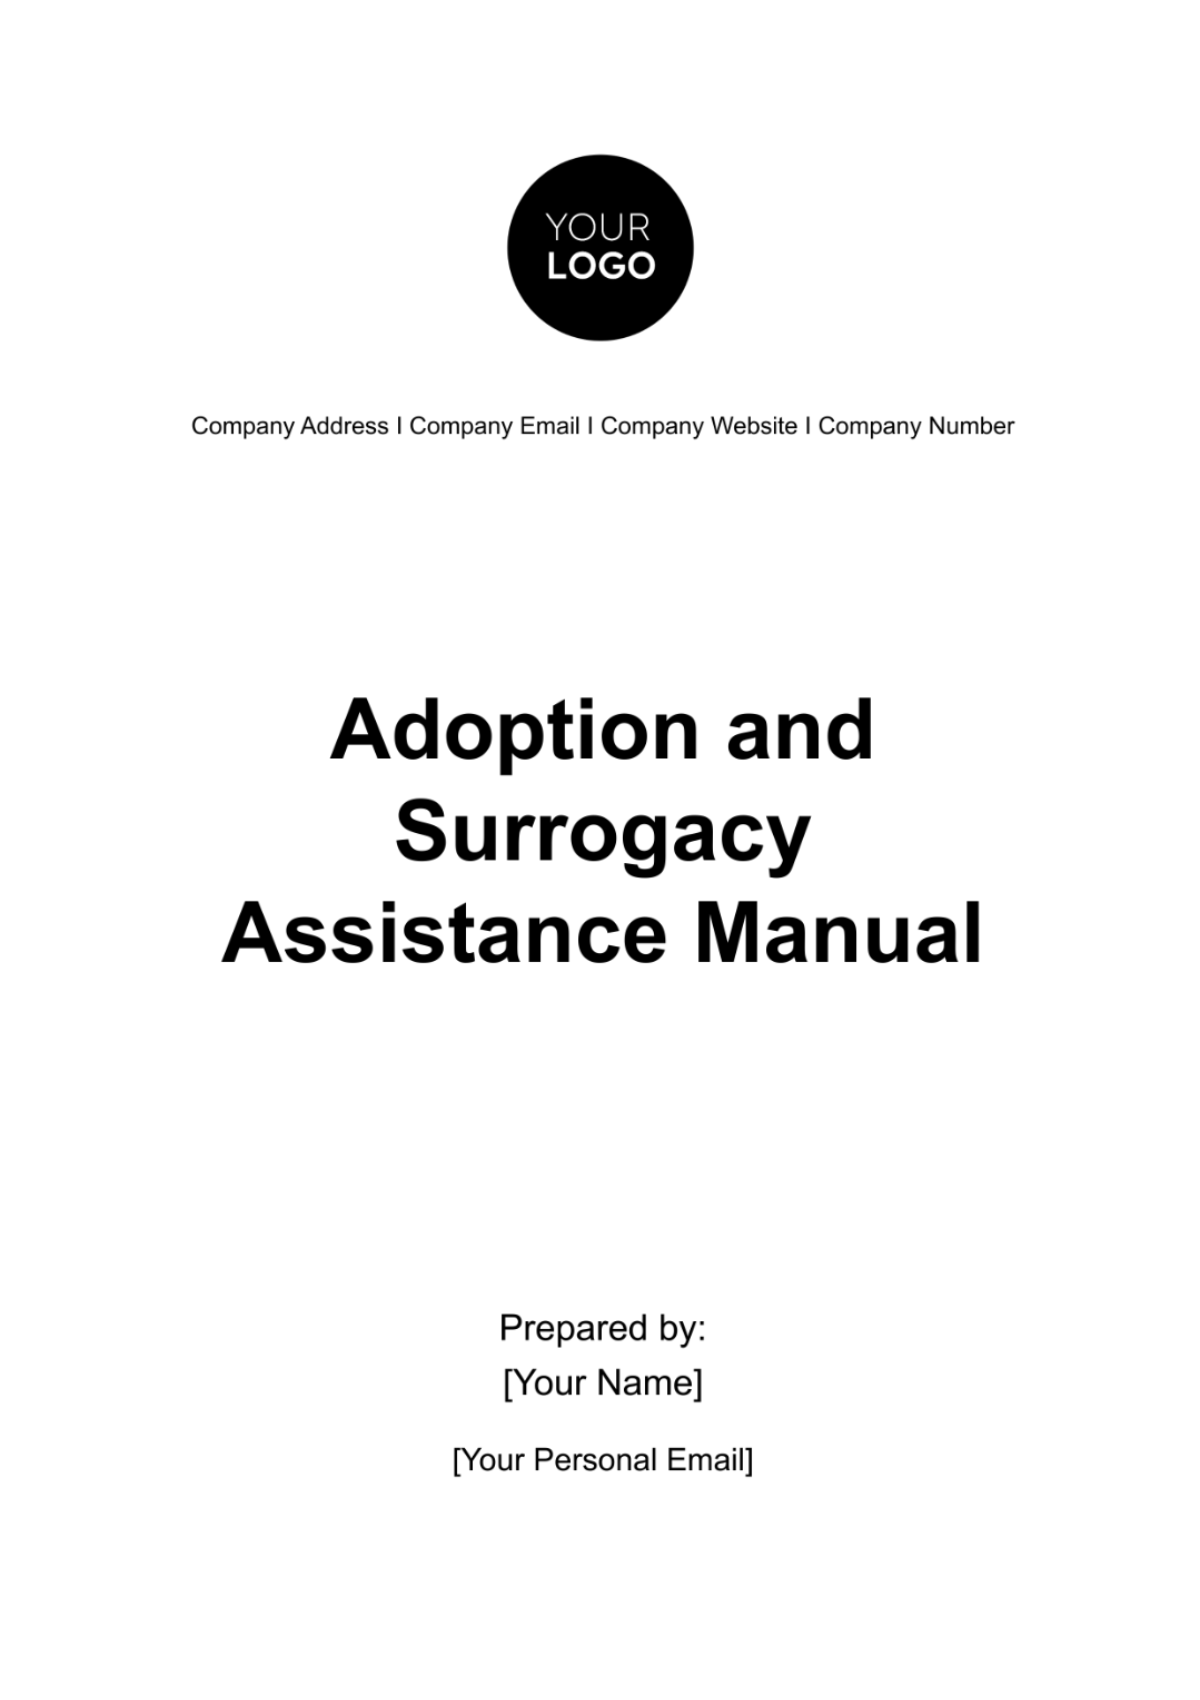 Free Adoption and Surrogacy Assistance Manual HR Template